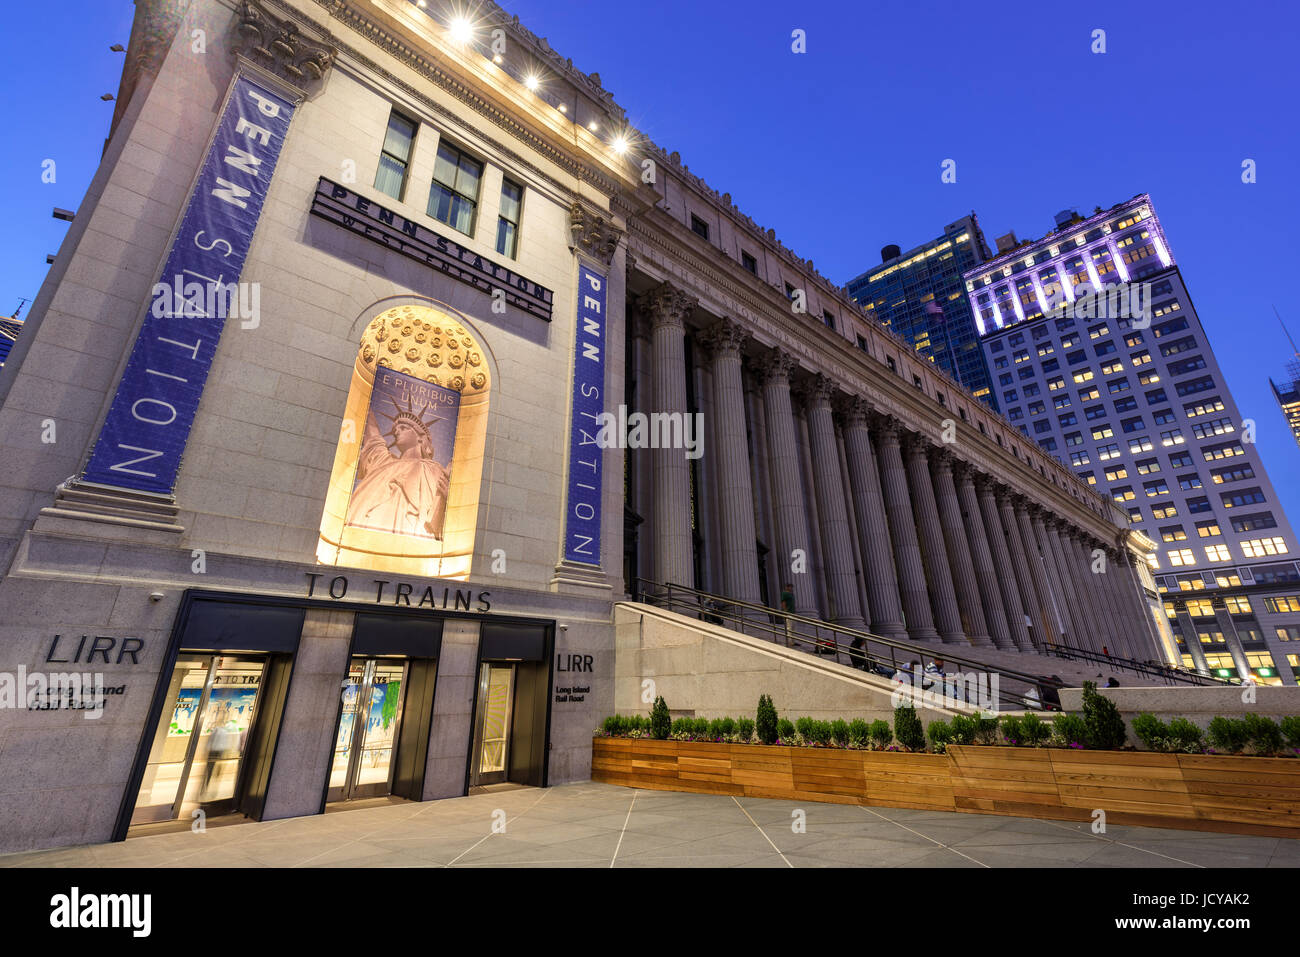 New York City, NY - June 15, 2017: Newly opened renovated West Entrance of Penn Station at the James A. Farley Post Office, Manhattan, New York City Stock Photo